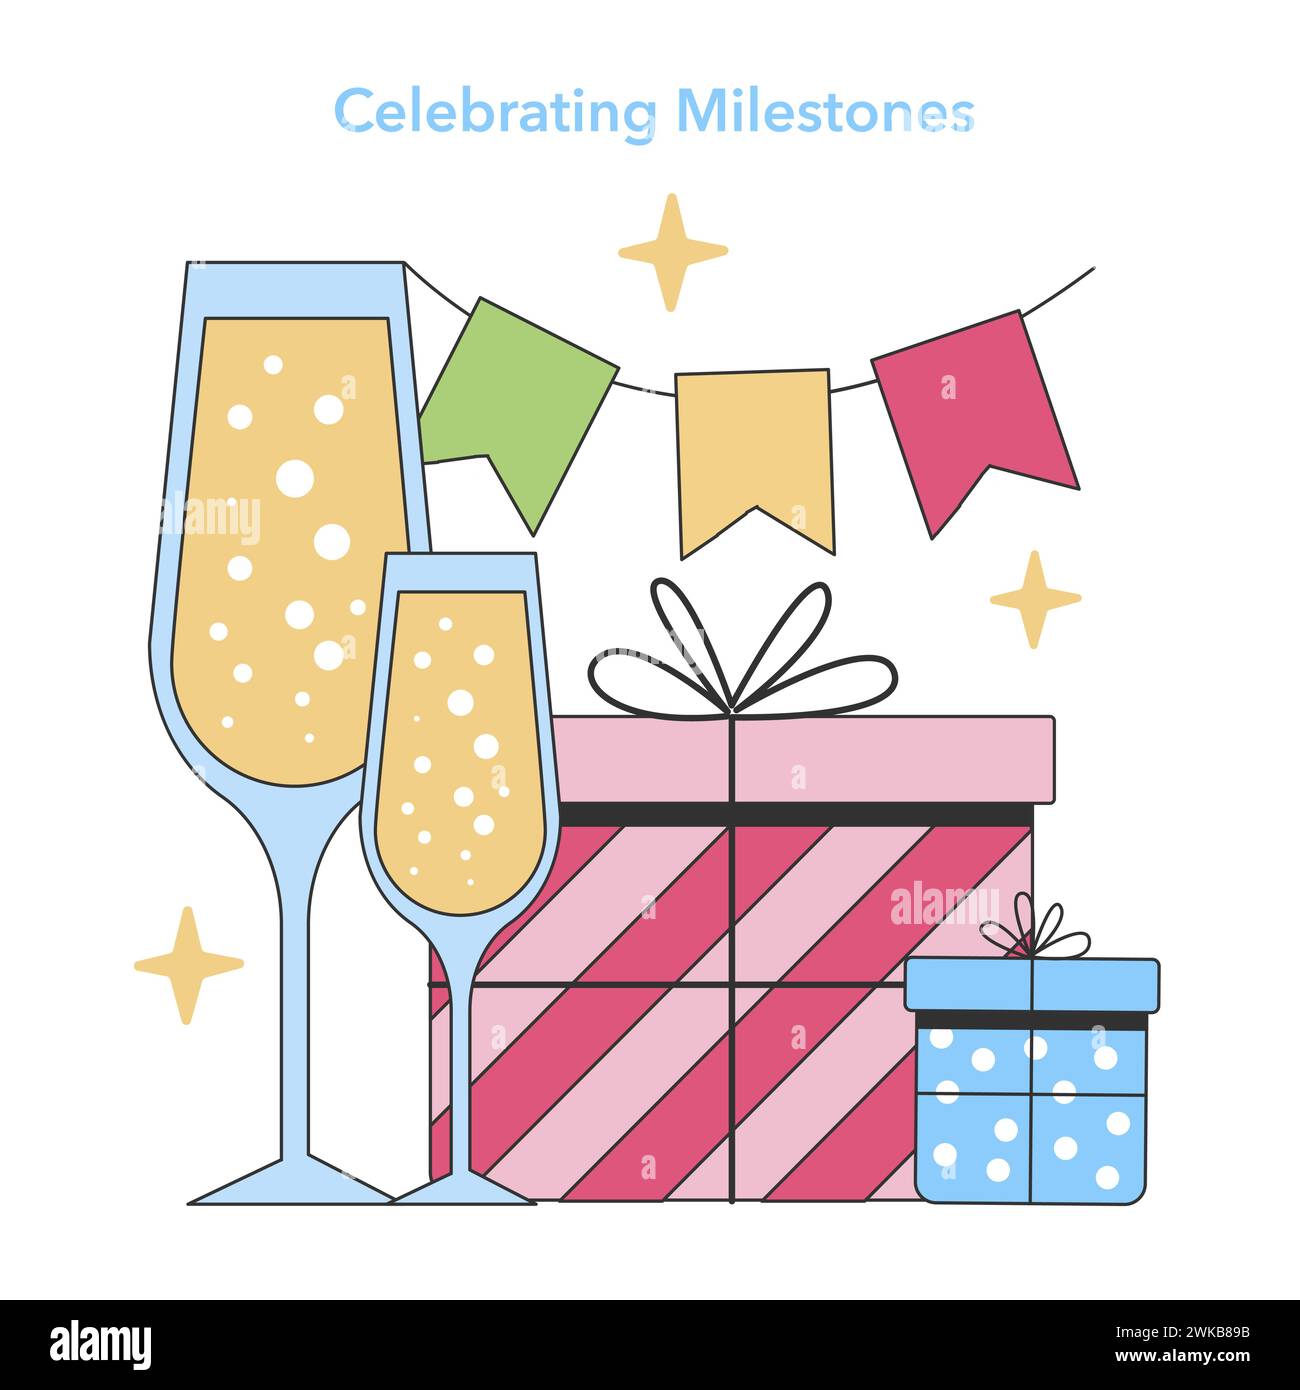 Celebration. Toasting to success and commemorated achievements. Festive decorations, presents, and joyful ambiance. Flat vector illustration. Stock Vector